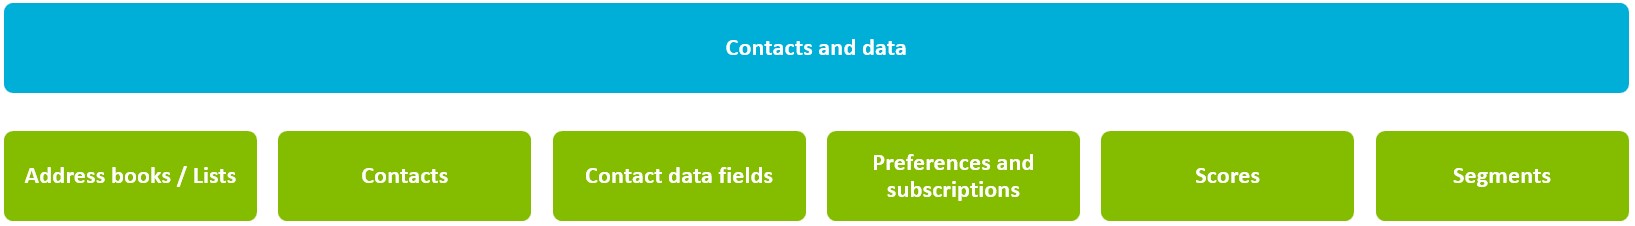 "Contacts and data" functionality